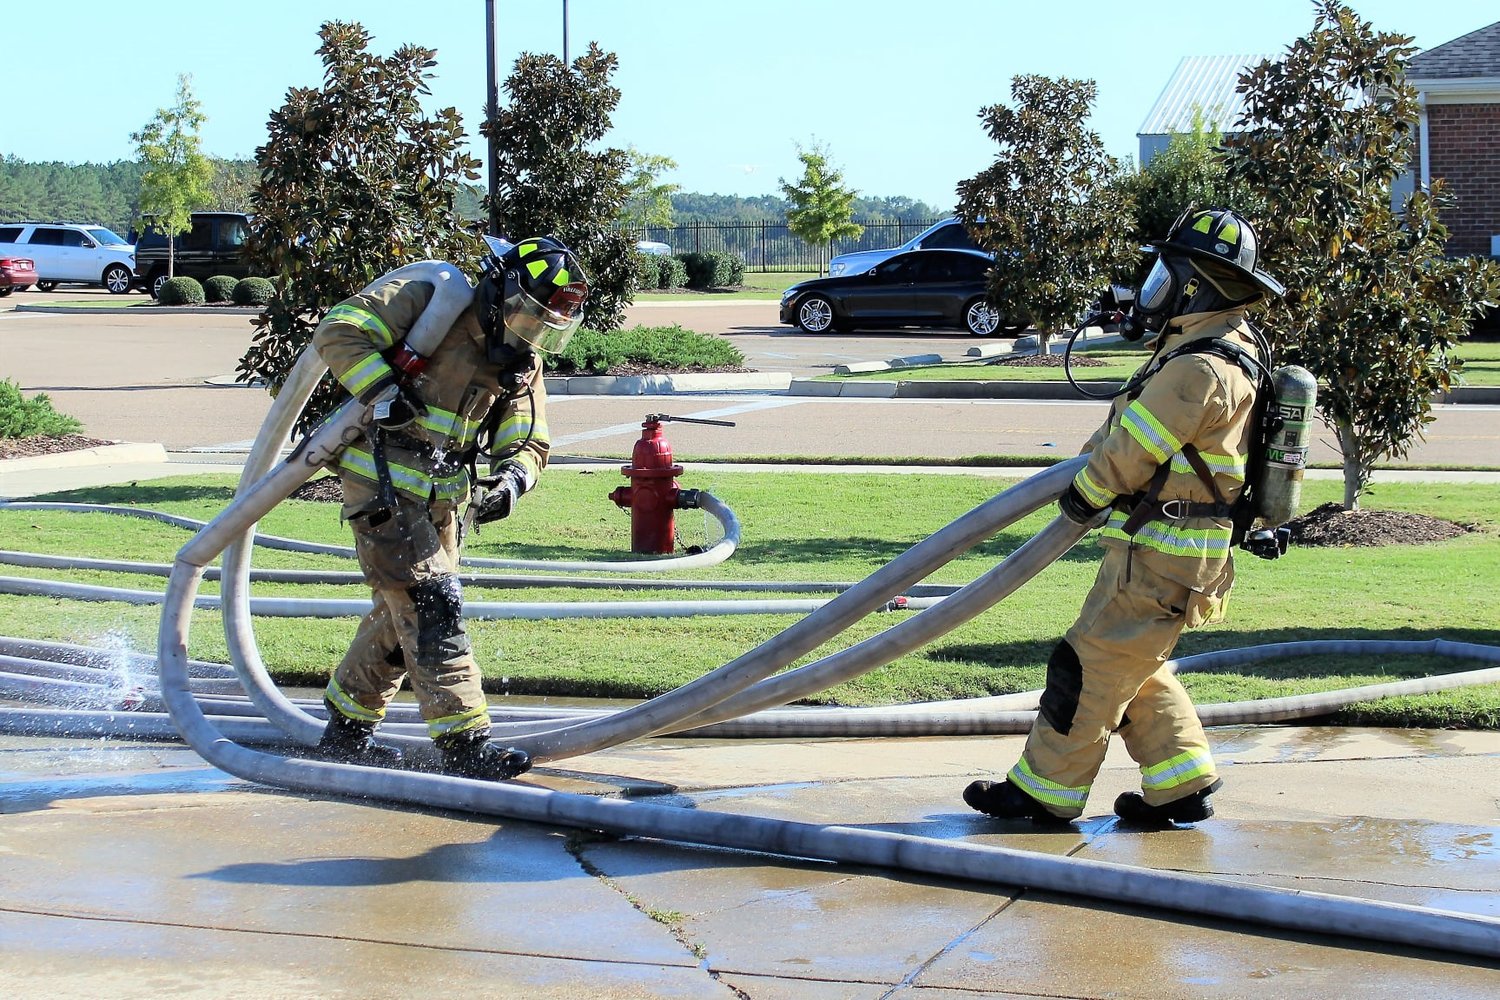 The Madison Fire Department held a training on team building and firefighting skills for their firefighters on Monday, Oct. 25 at Station 2 on Old Canton Road.